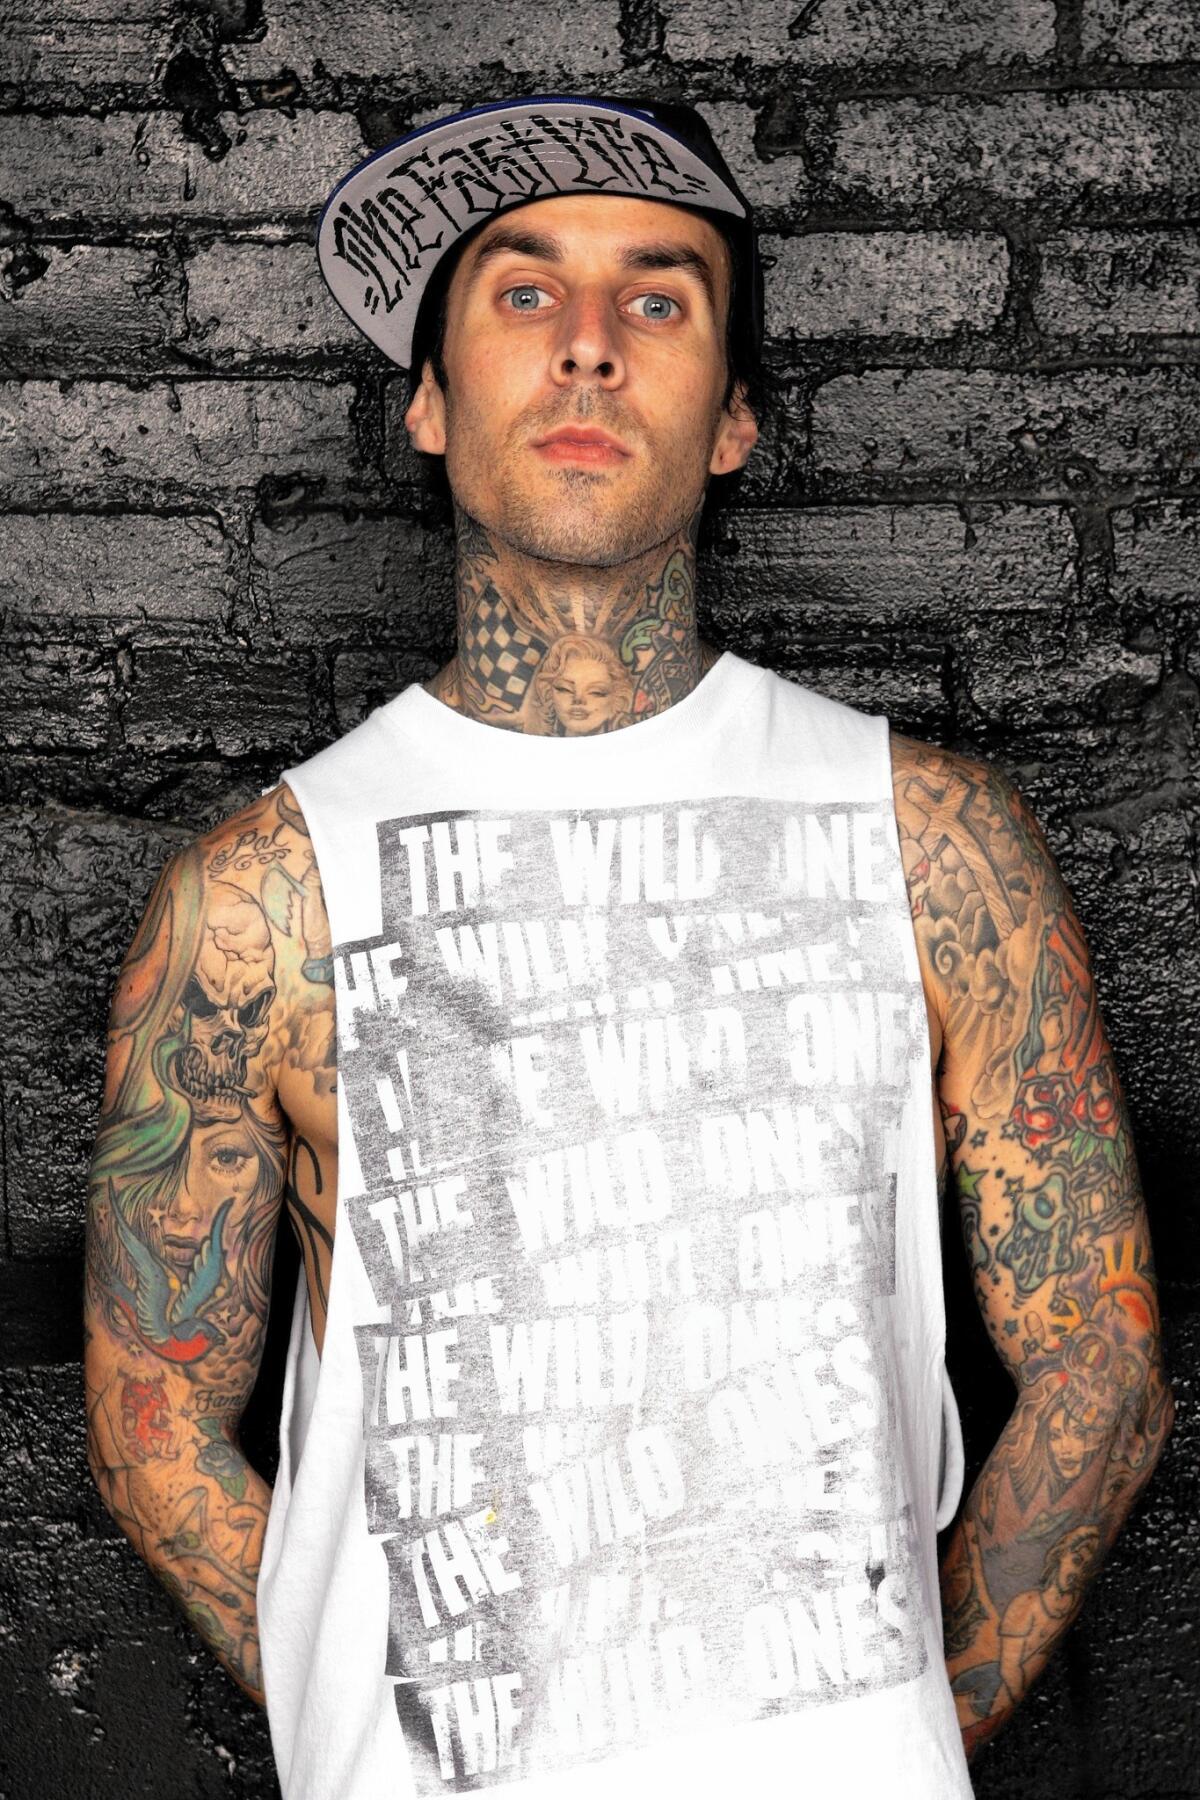 Blink-182 drummer Travis Barker has performed and been part of the organizing committee for the annual Musink event in Costa Mesa.